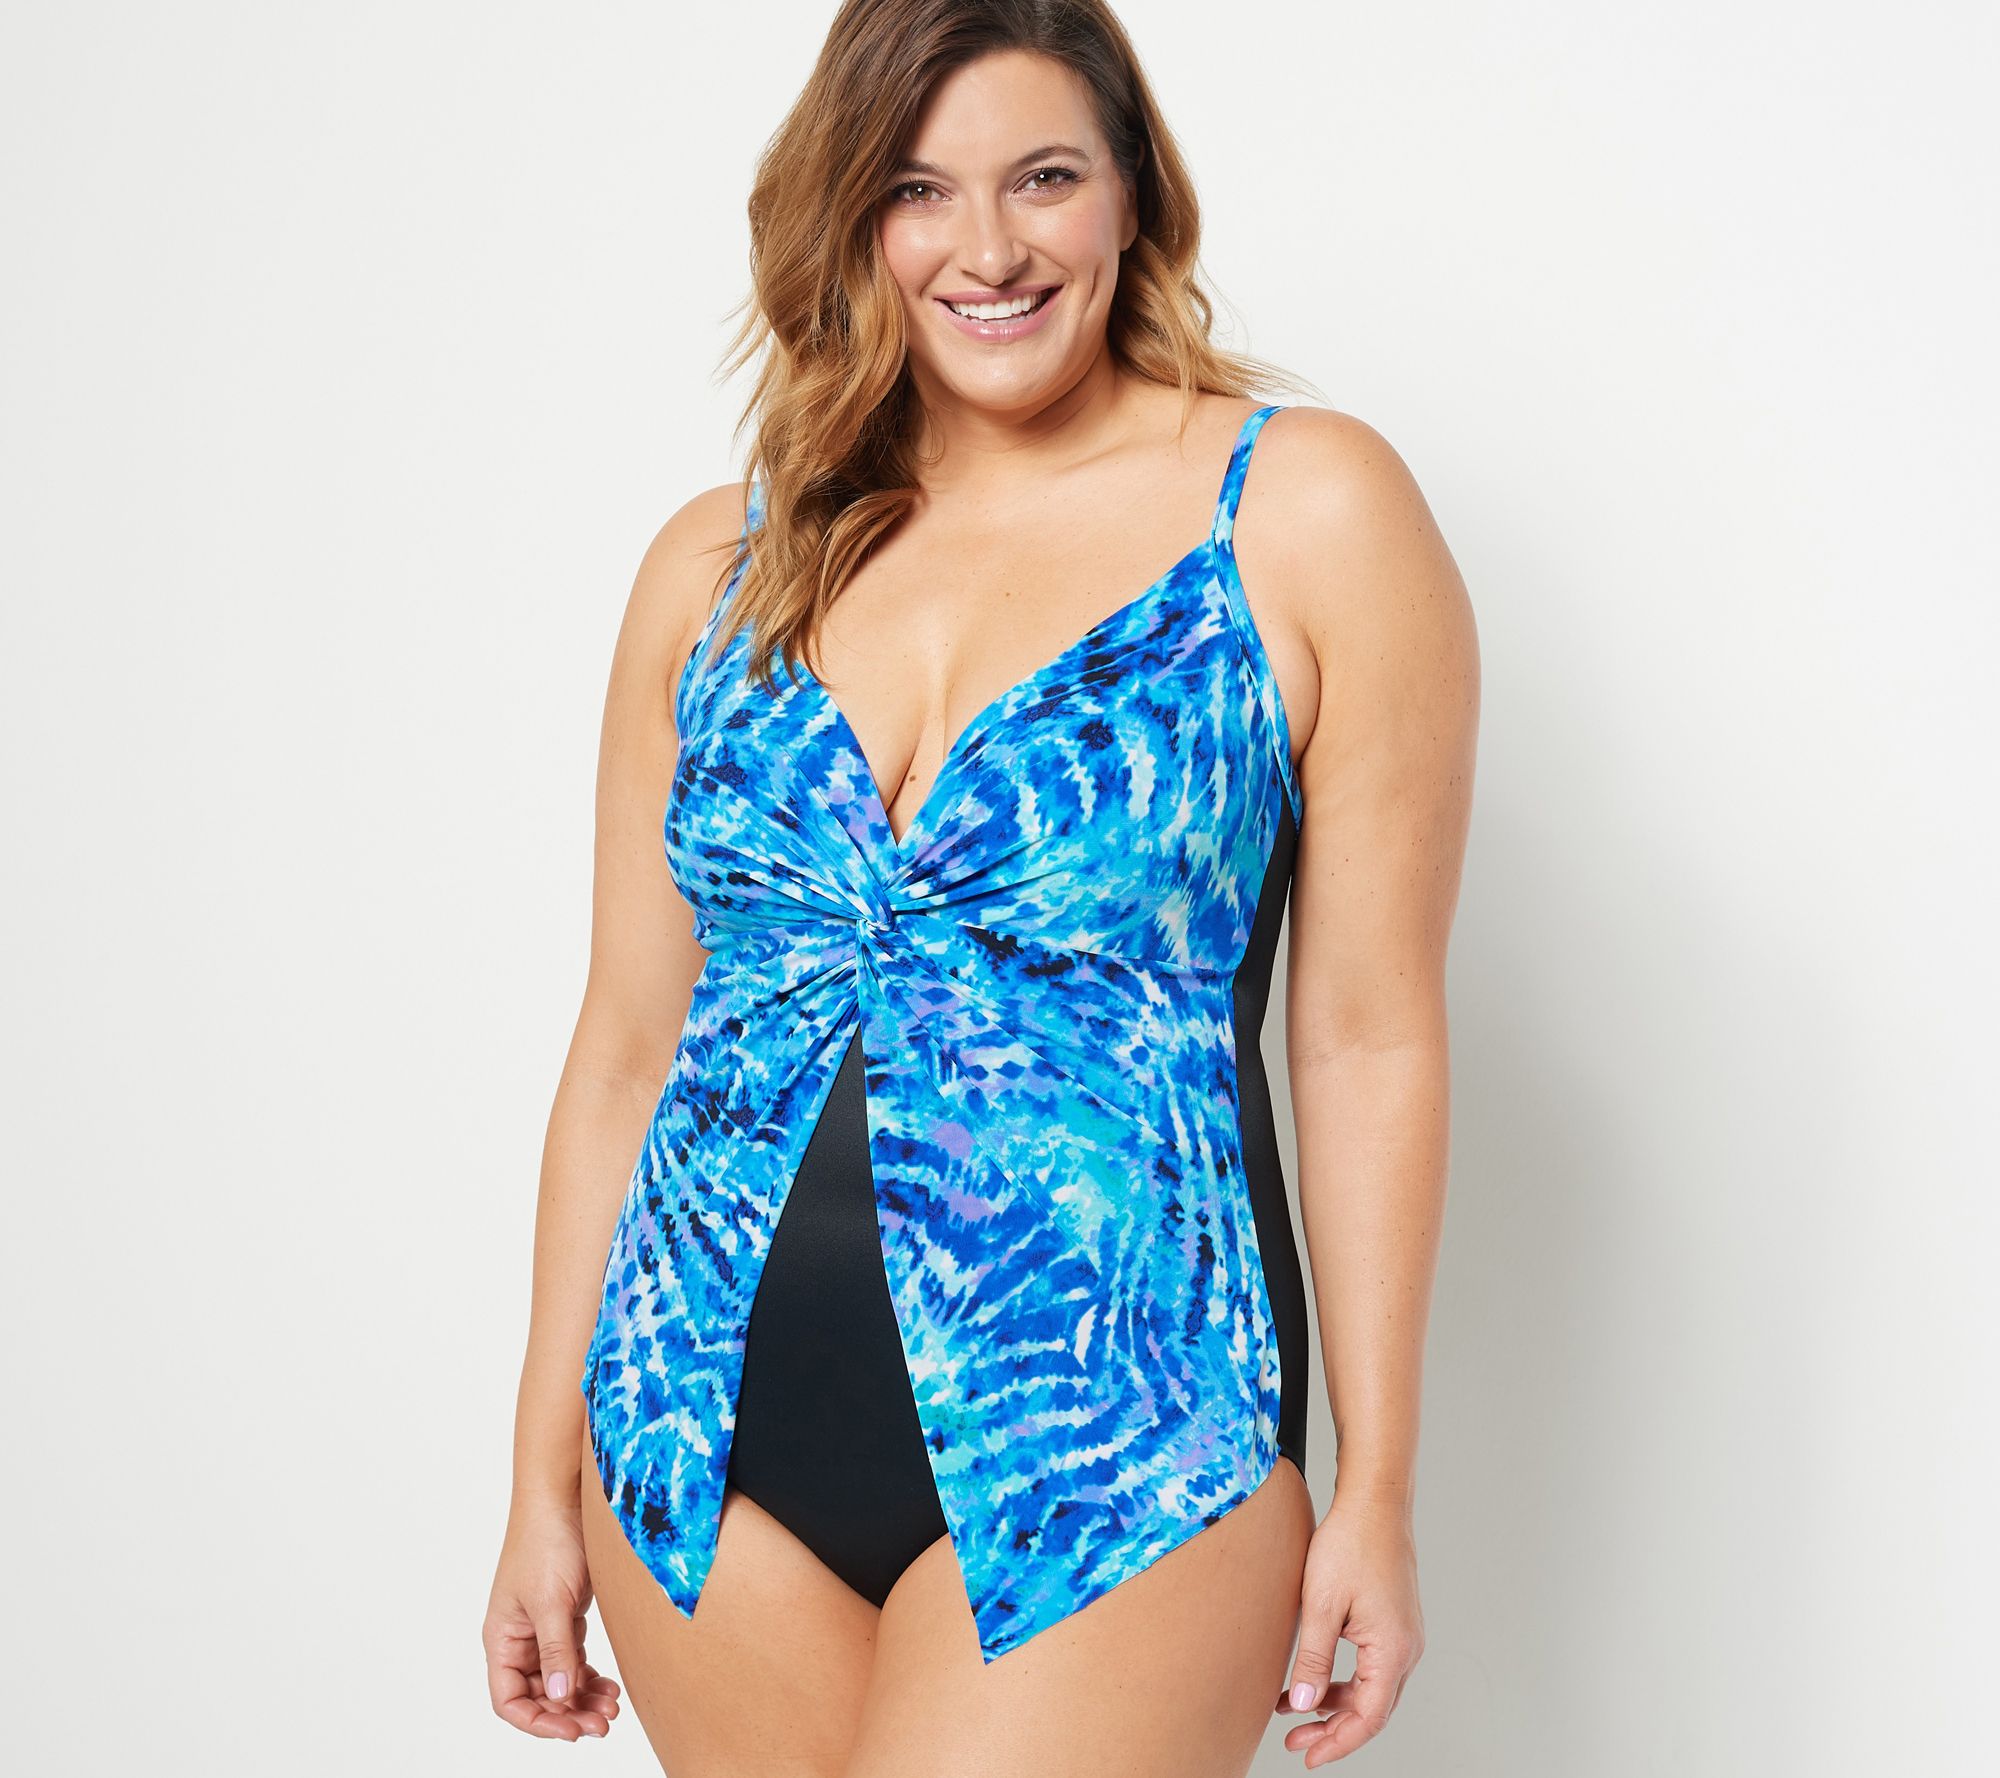 Miraclesuit Rock Solid Avra High Neck One Piece Swimsuit | Dillard's